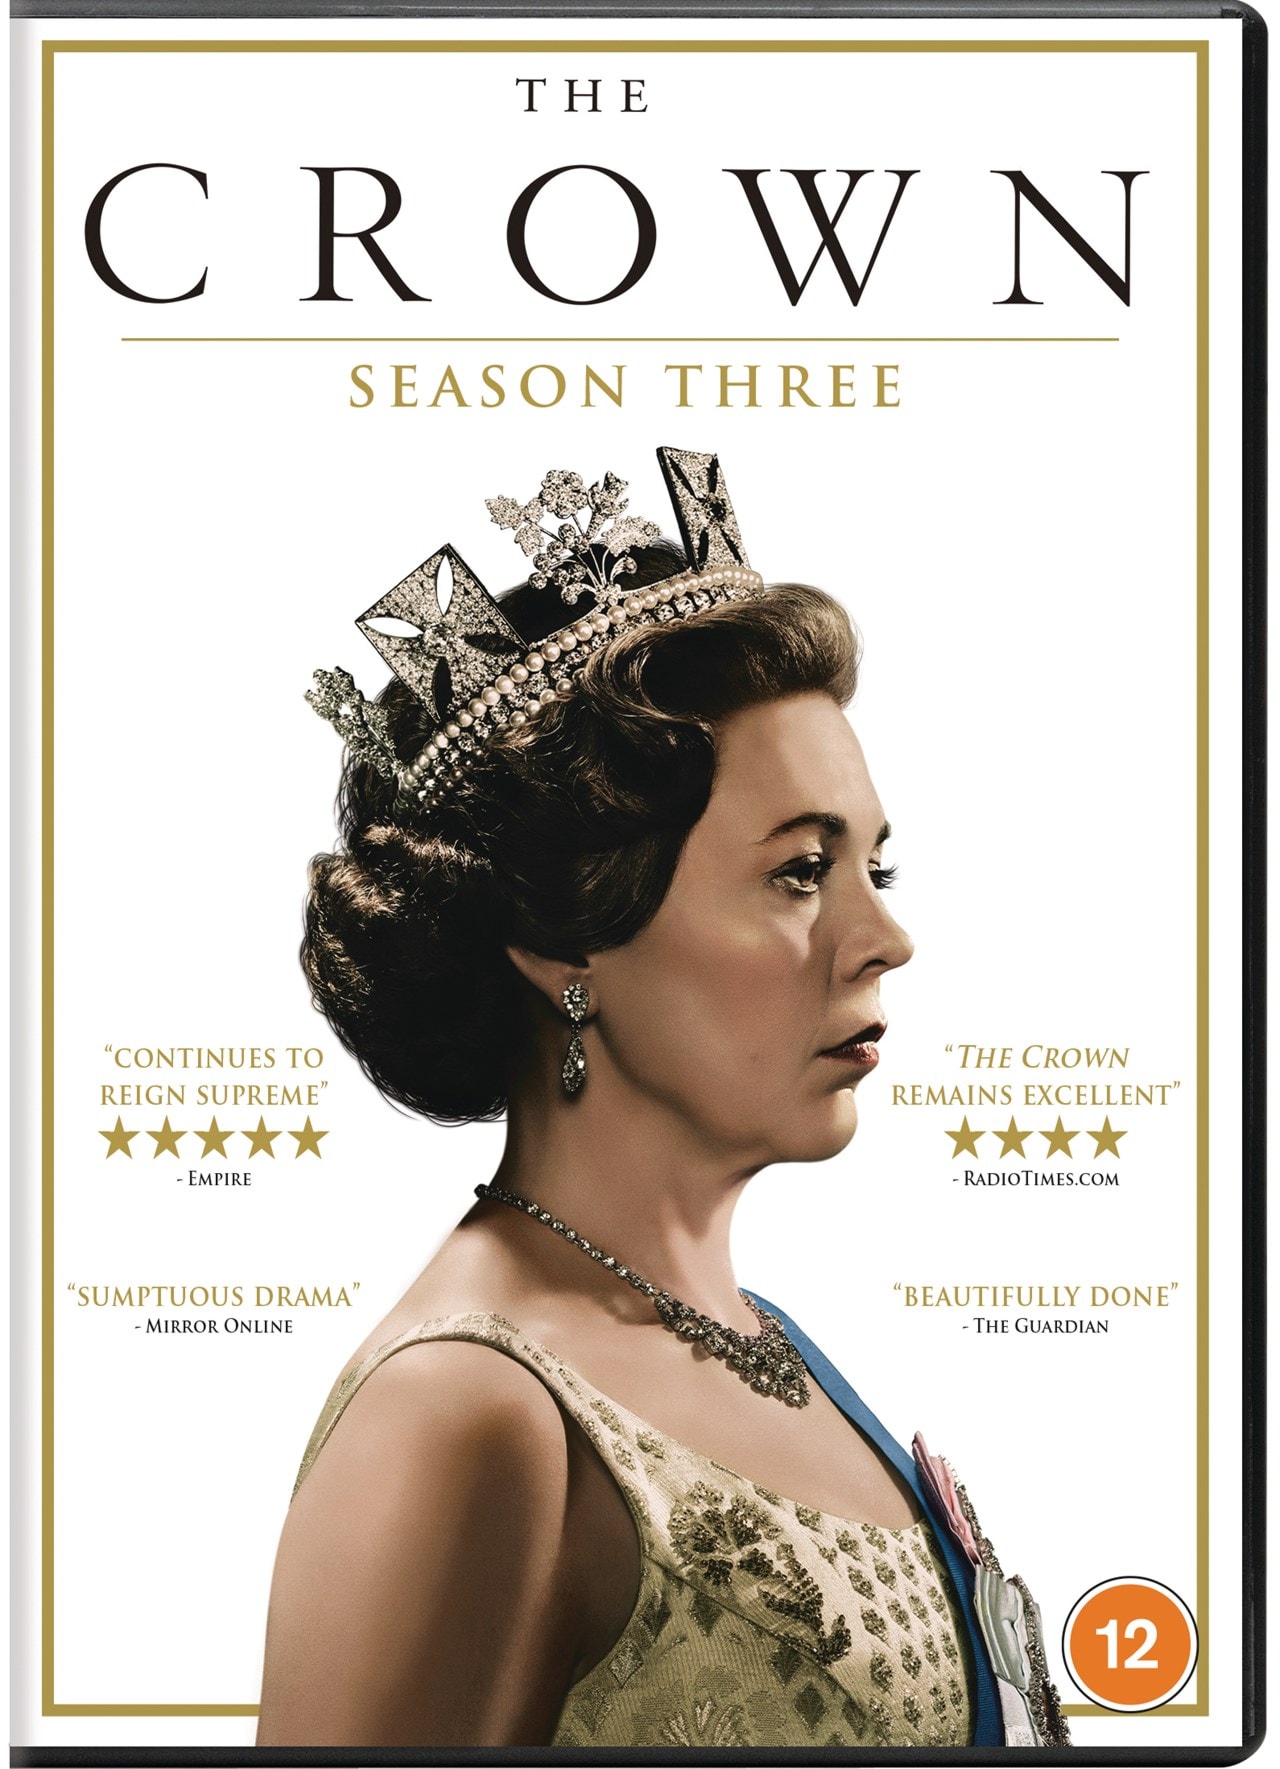 The Crown Season 3 Dvd Series 3 Box Set Free Delivery Over £20 Hmv Store